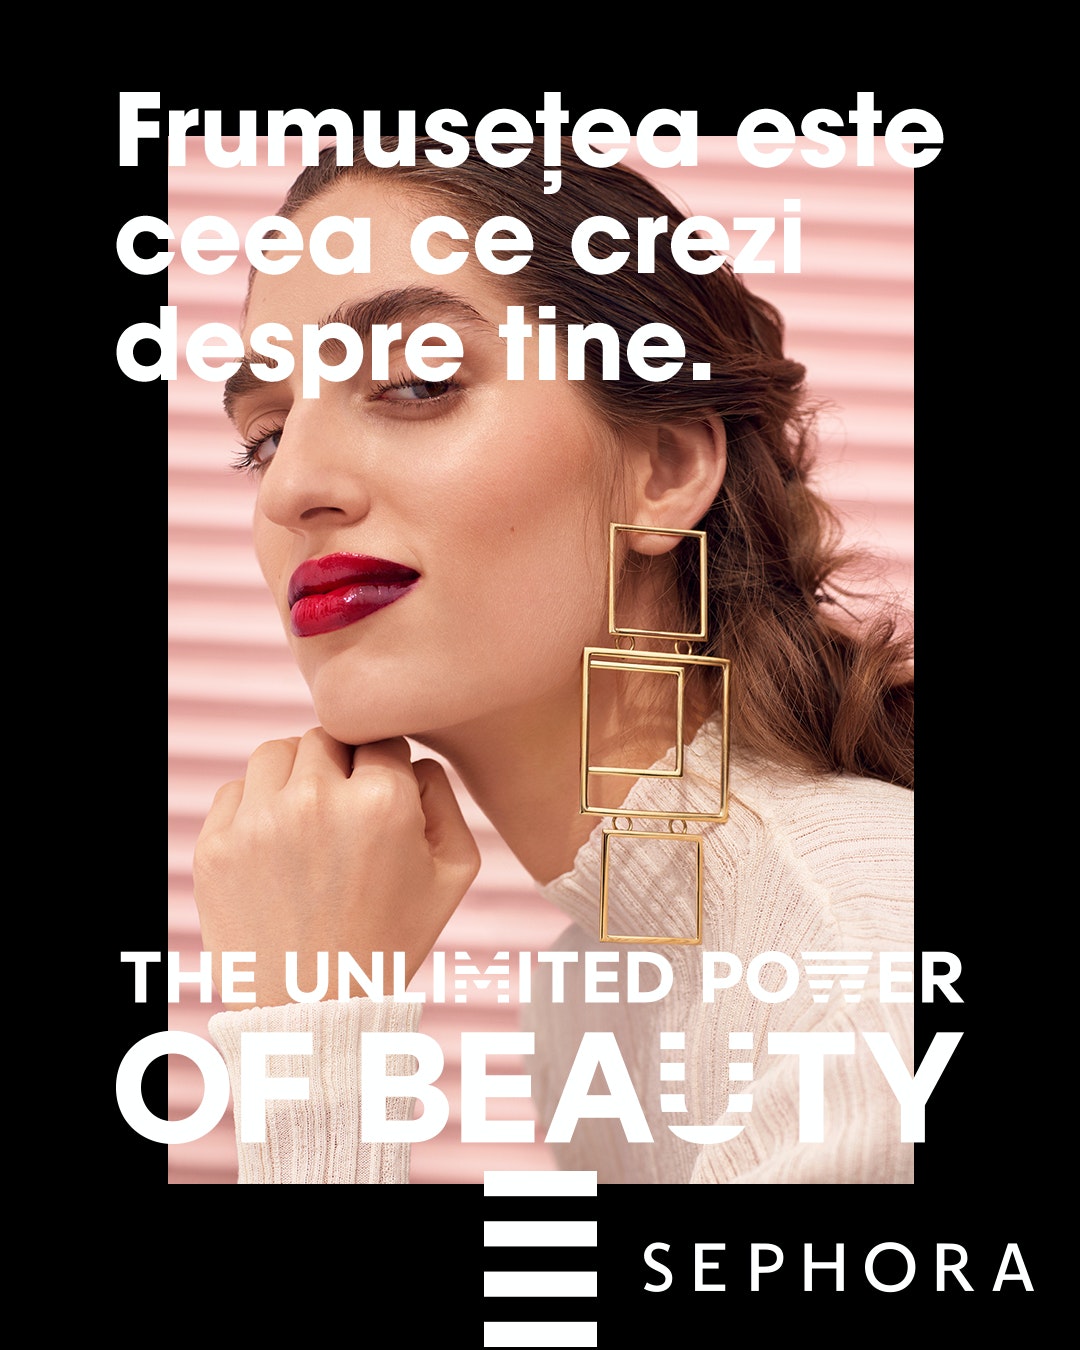 The Unlimited Power of Beauty – new Sephora campaign